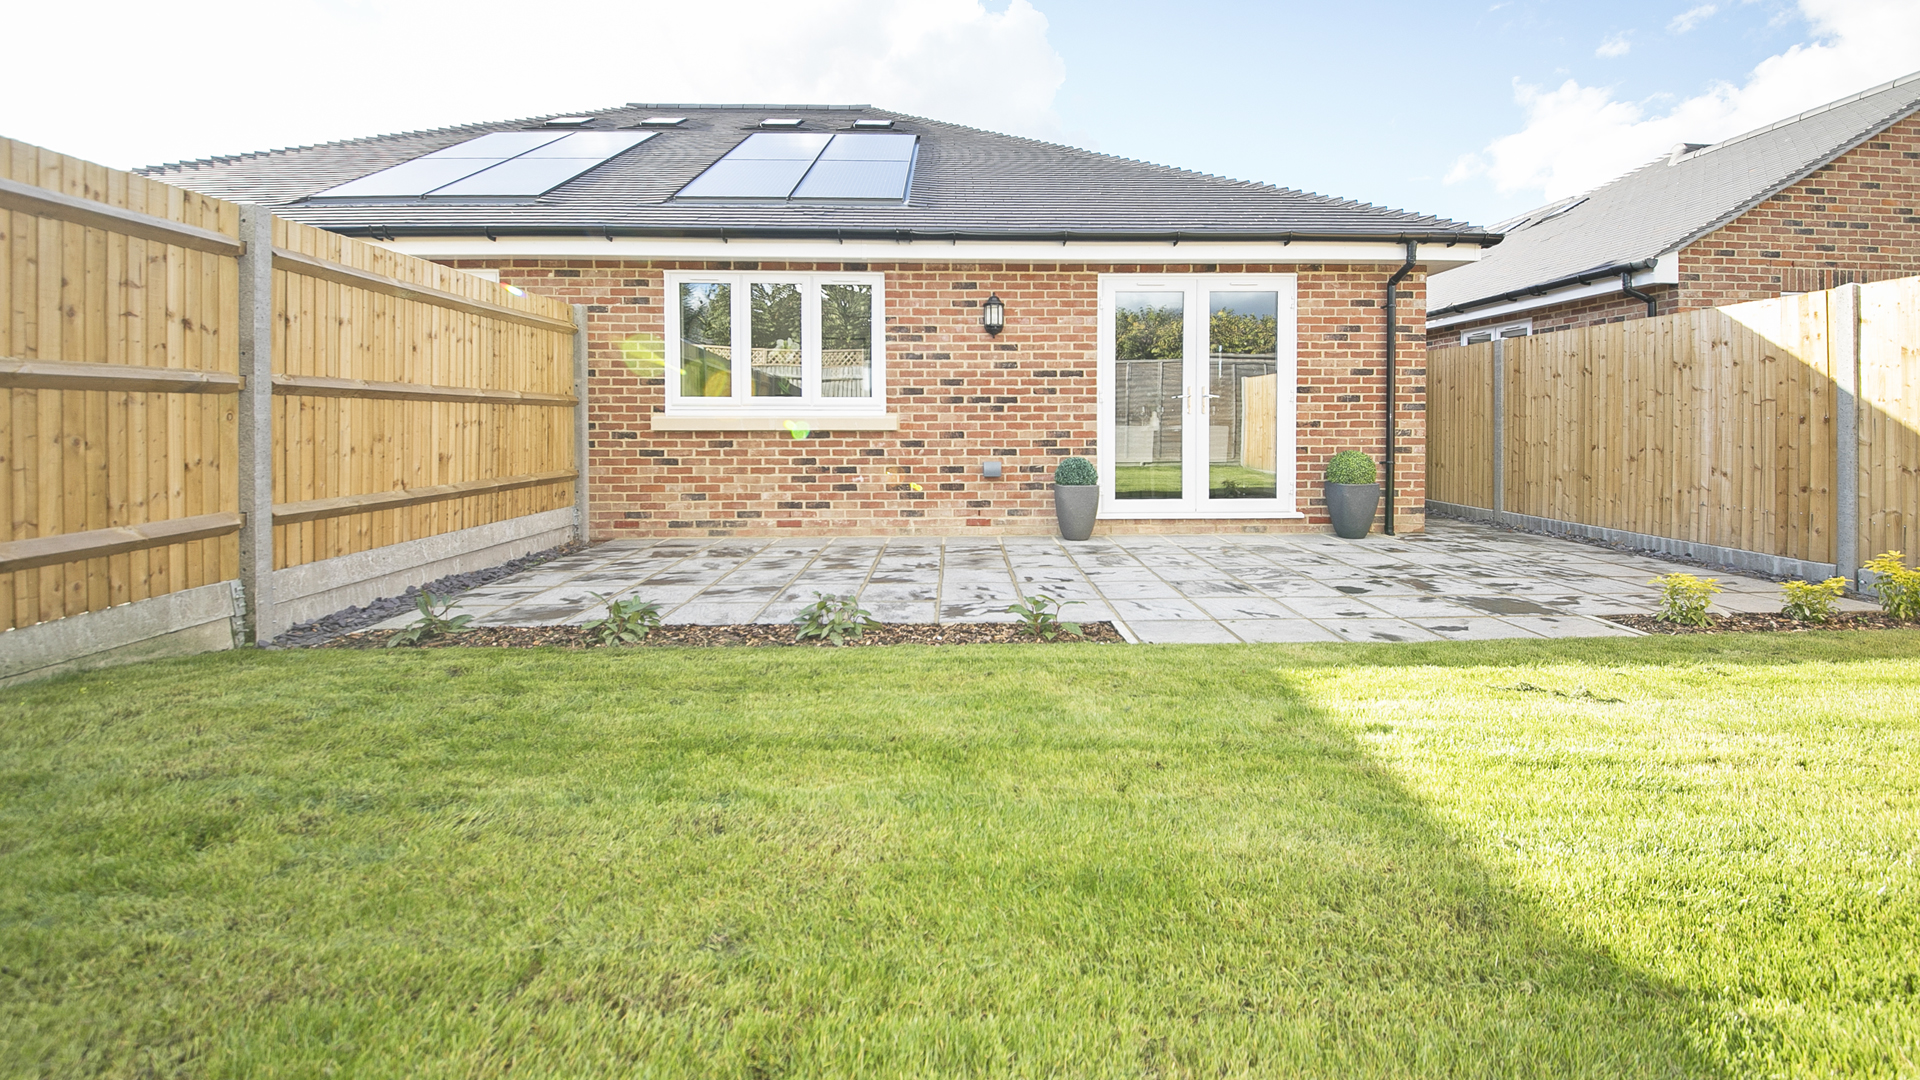 A new build bungalow at Churchfields, with grass and flower beds.